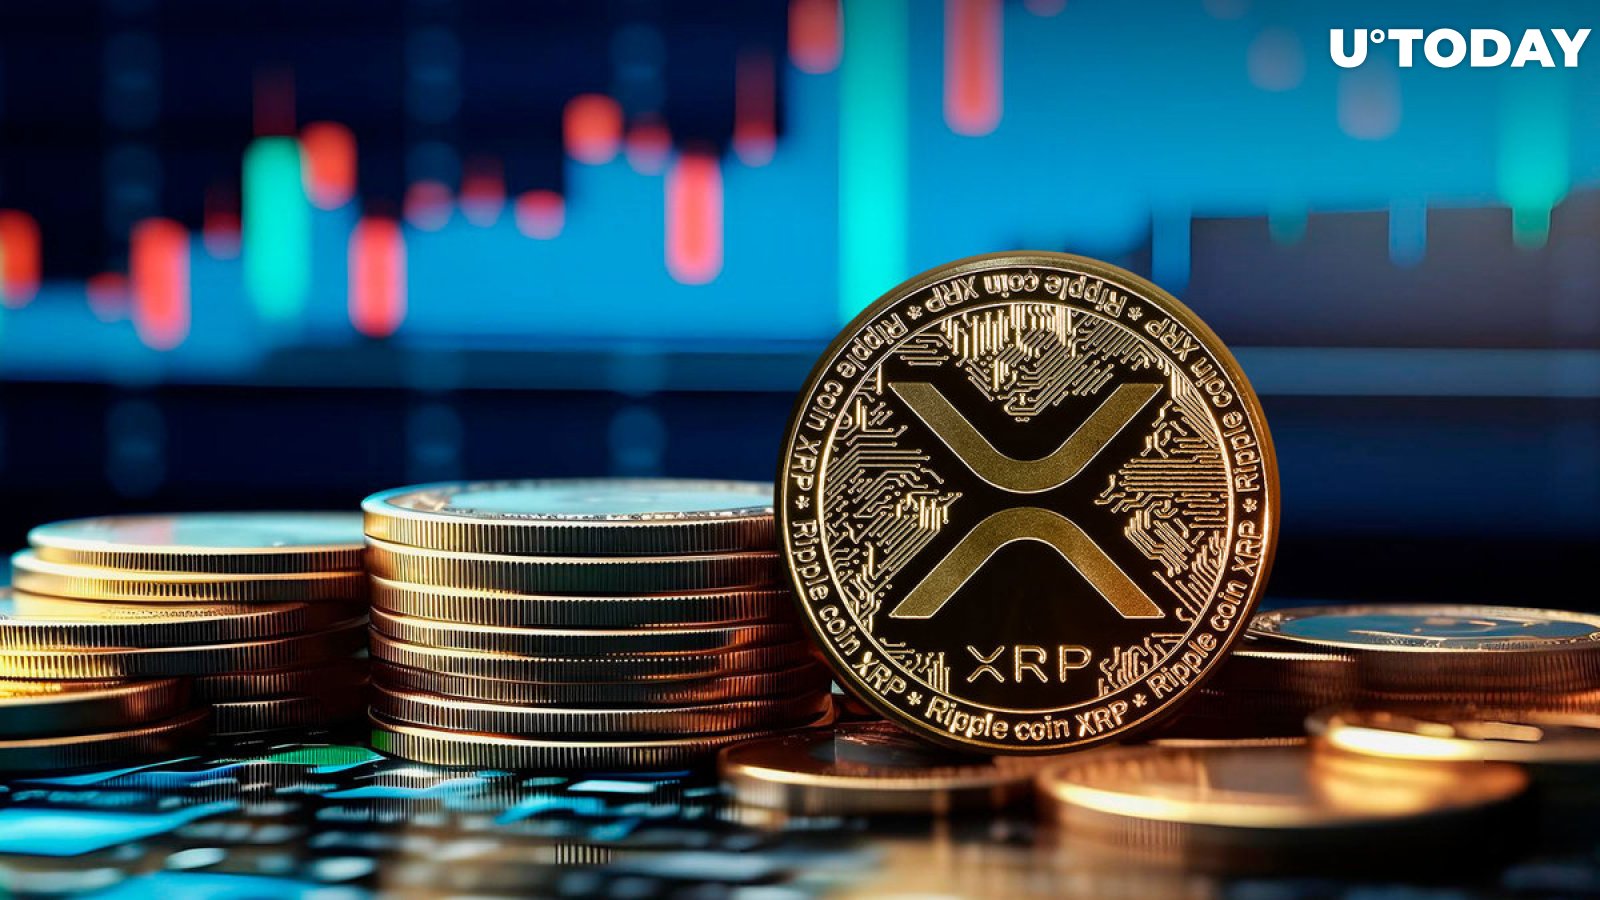 XRP just broke its record as the price soars 16%